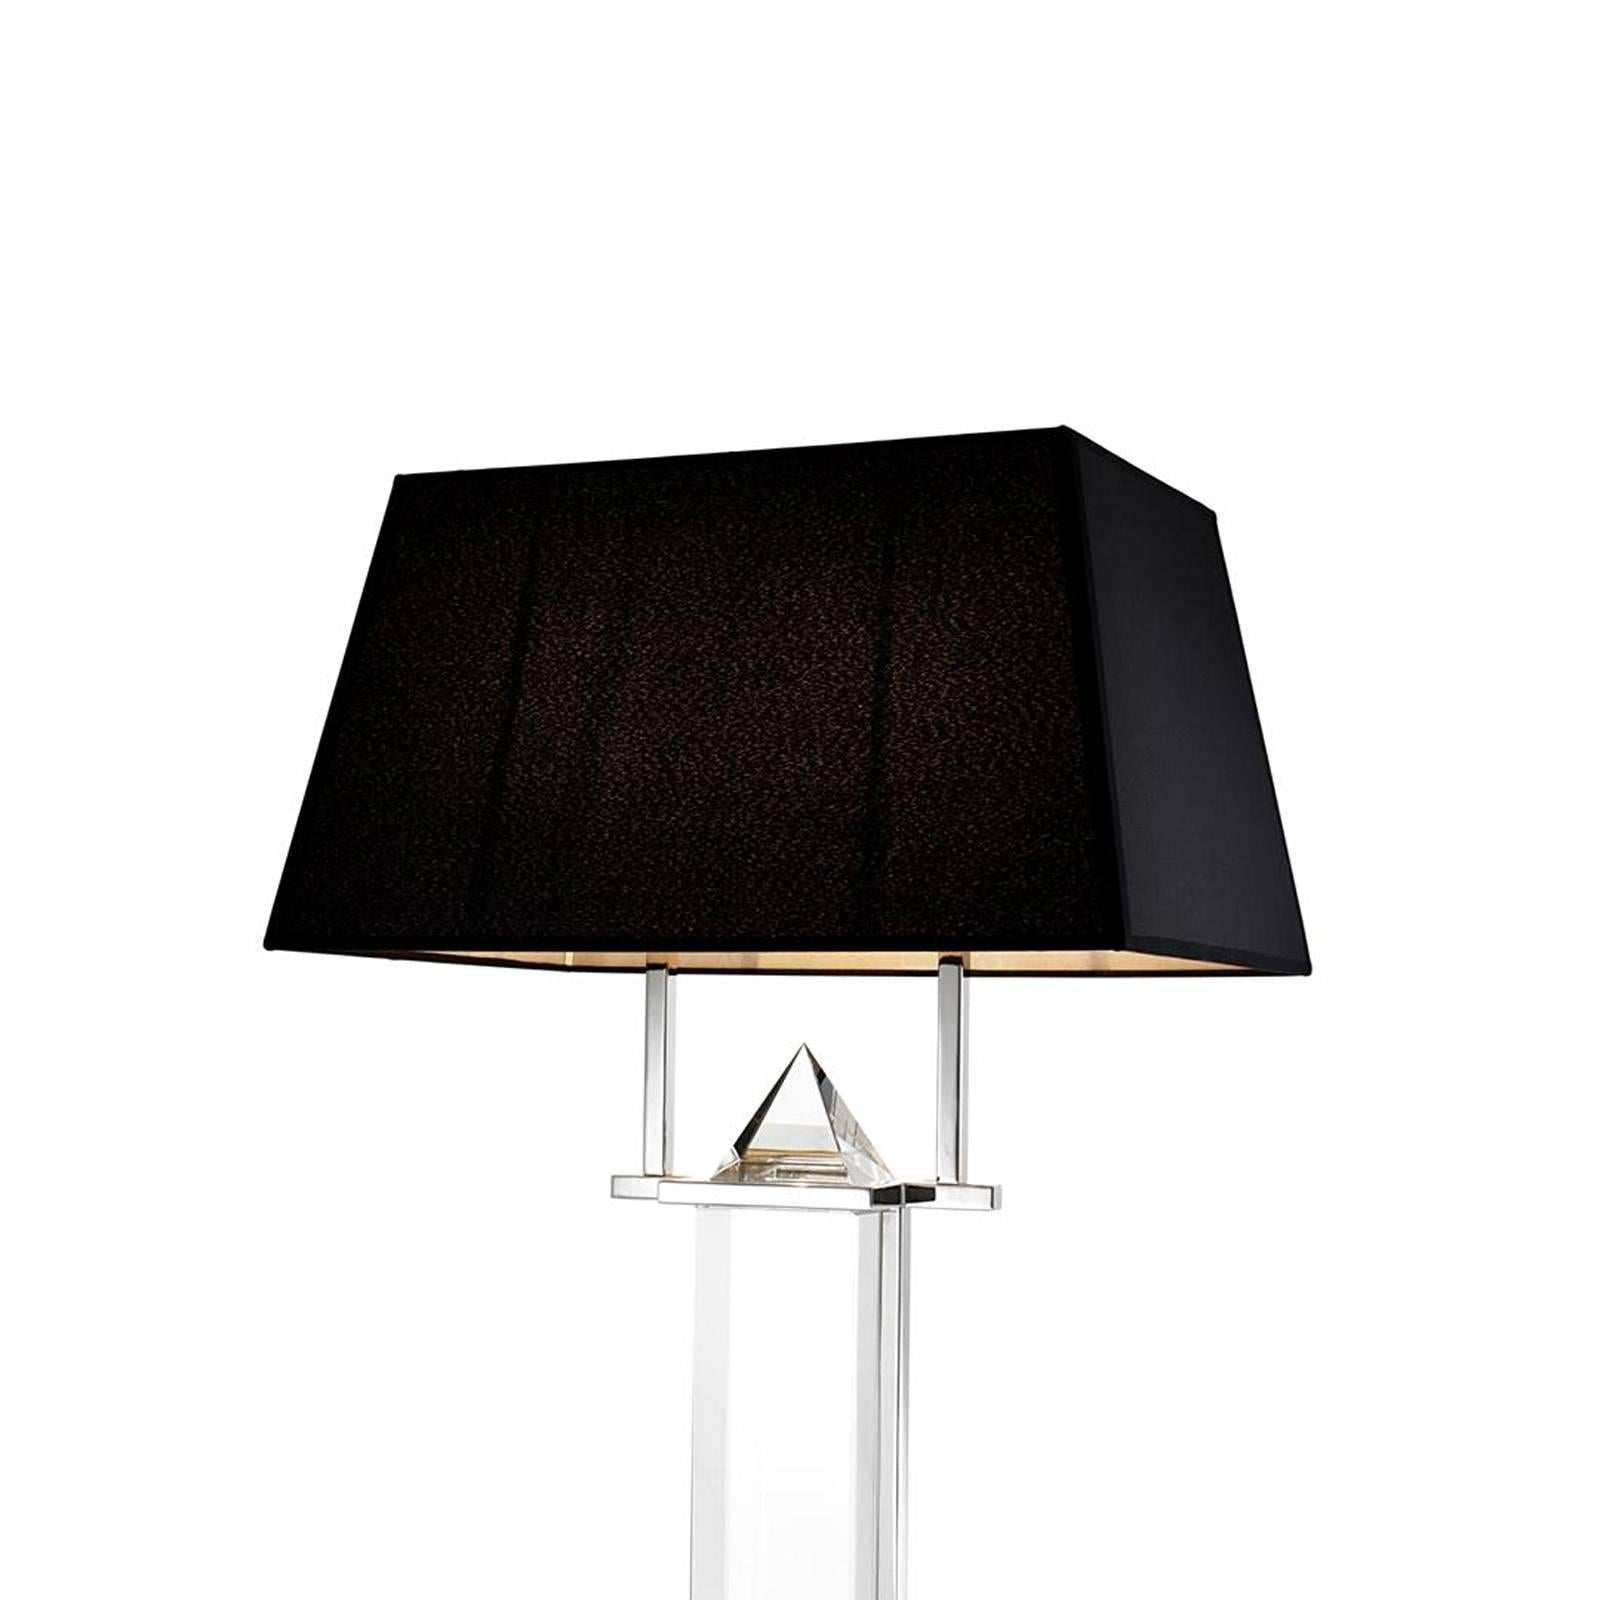 Dutch Diamant Floor Lamp in Crystal Glass and Polished Nickel Finish